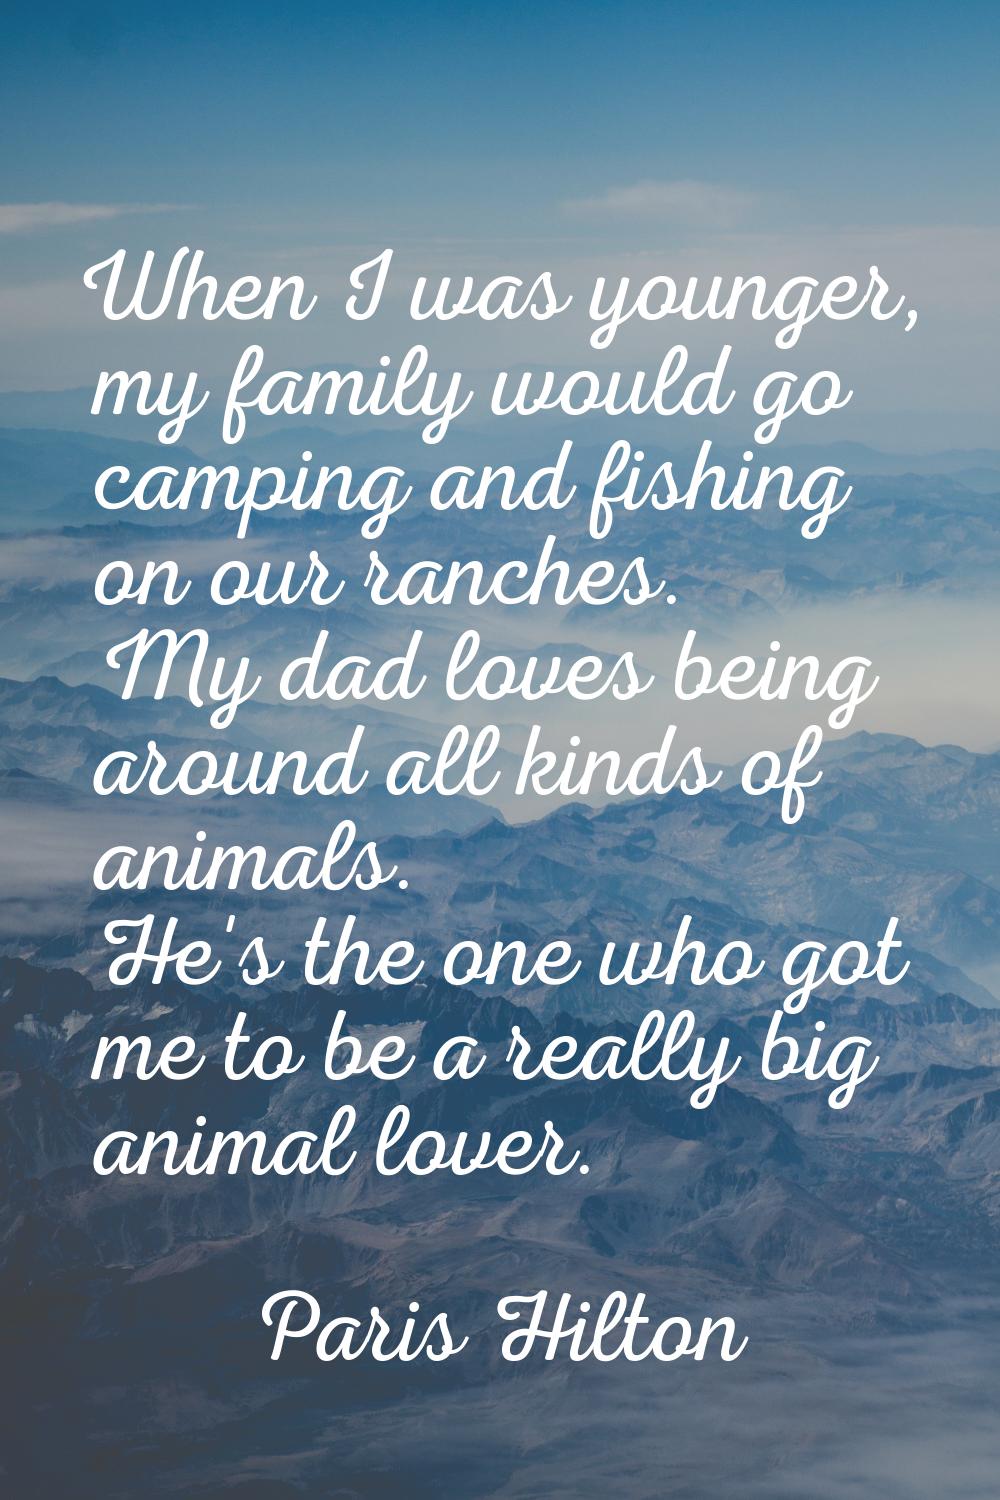 When I was younger, my family would go camping and fishing on our ranches. My dad loves being aroun